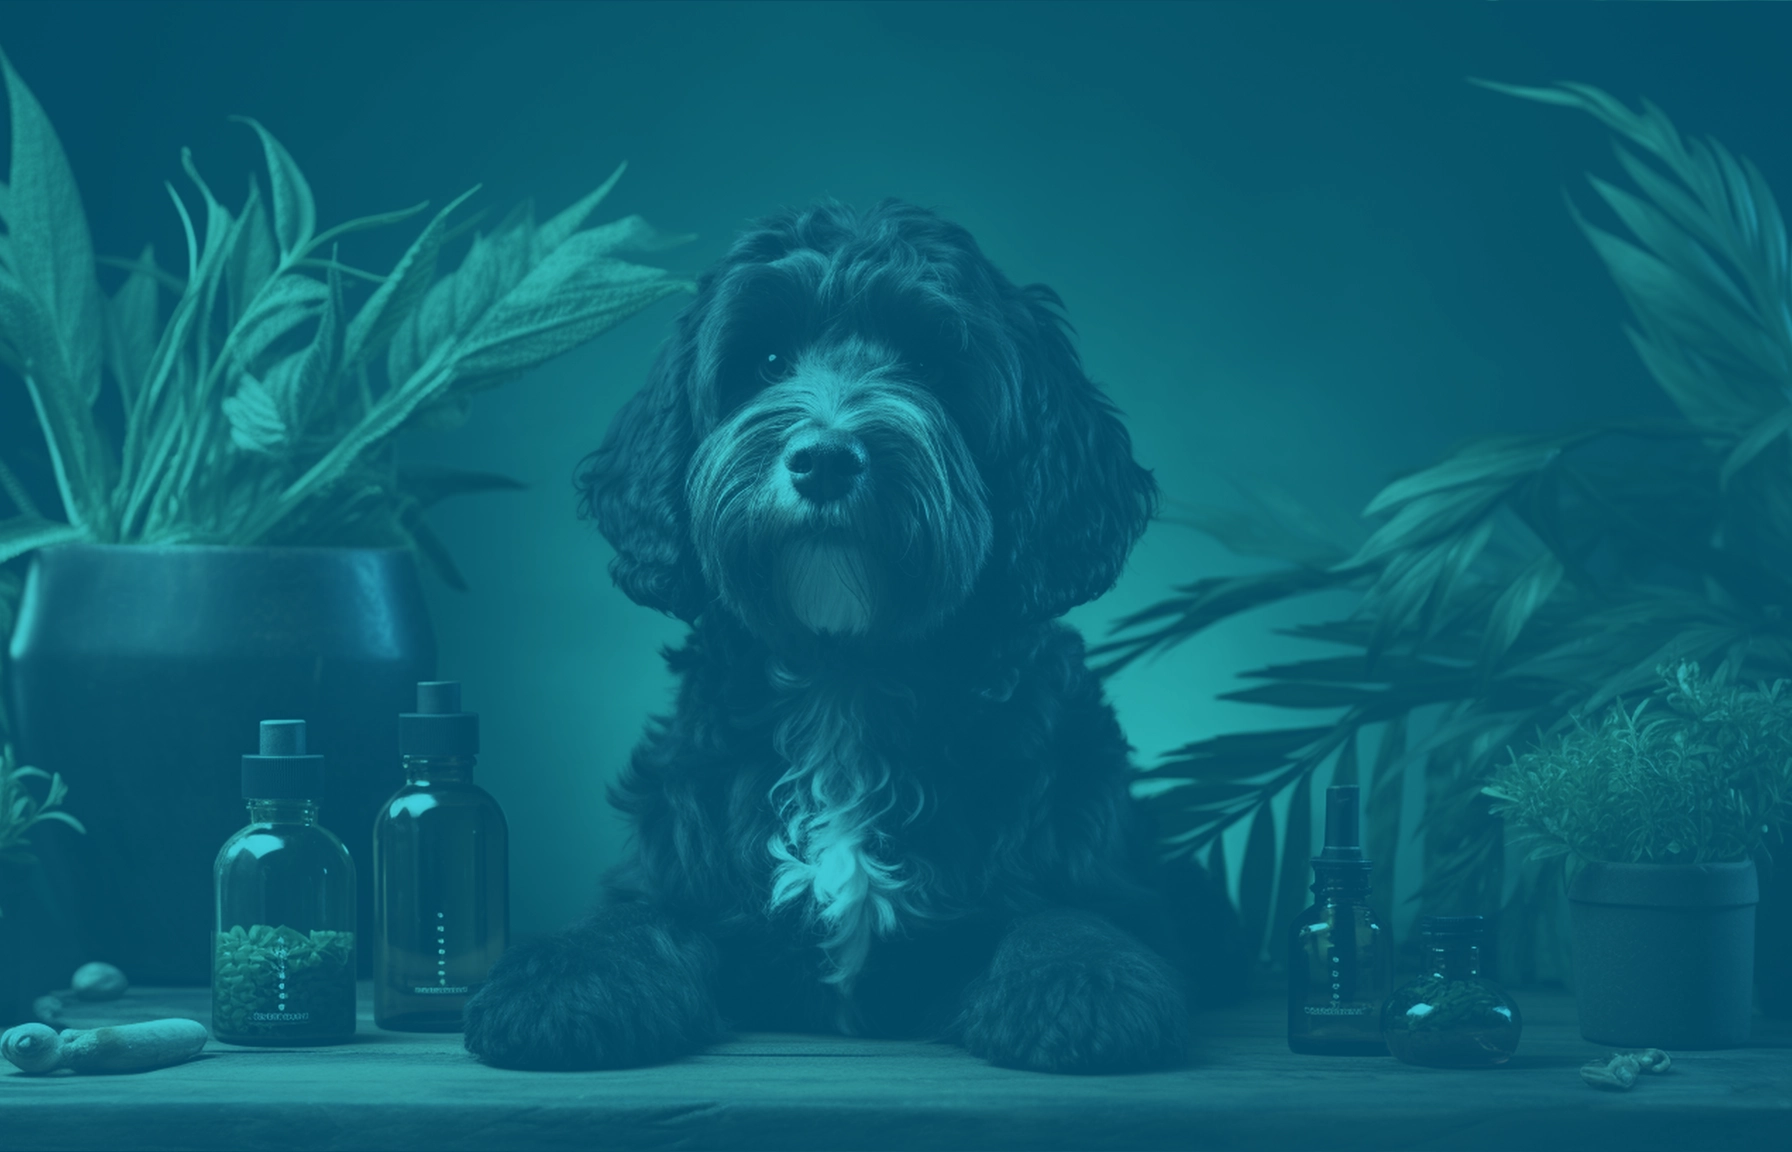 This is an image of a dog with a CBD inspired foreground and background.